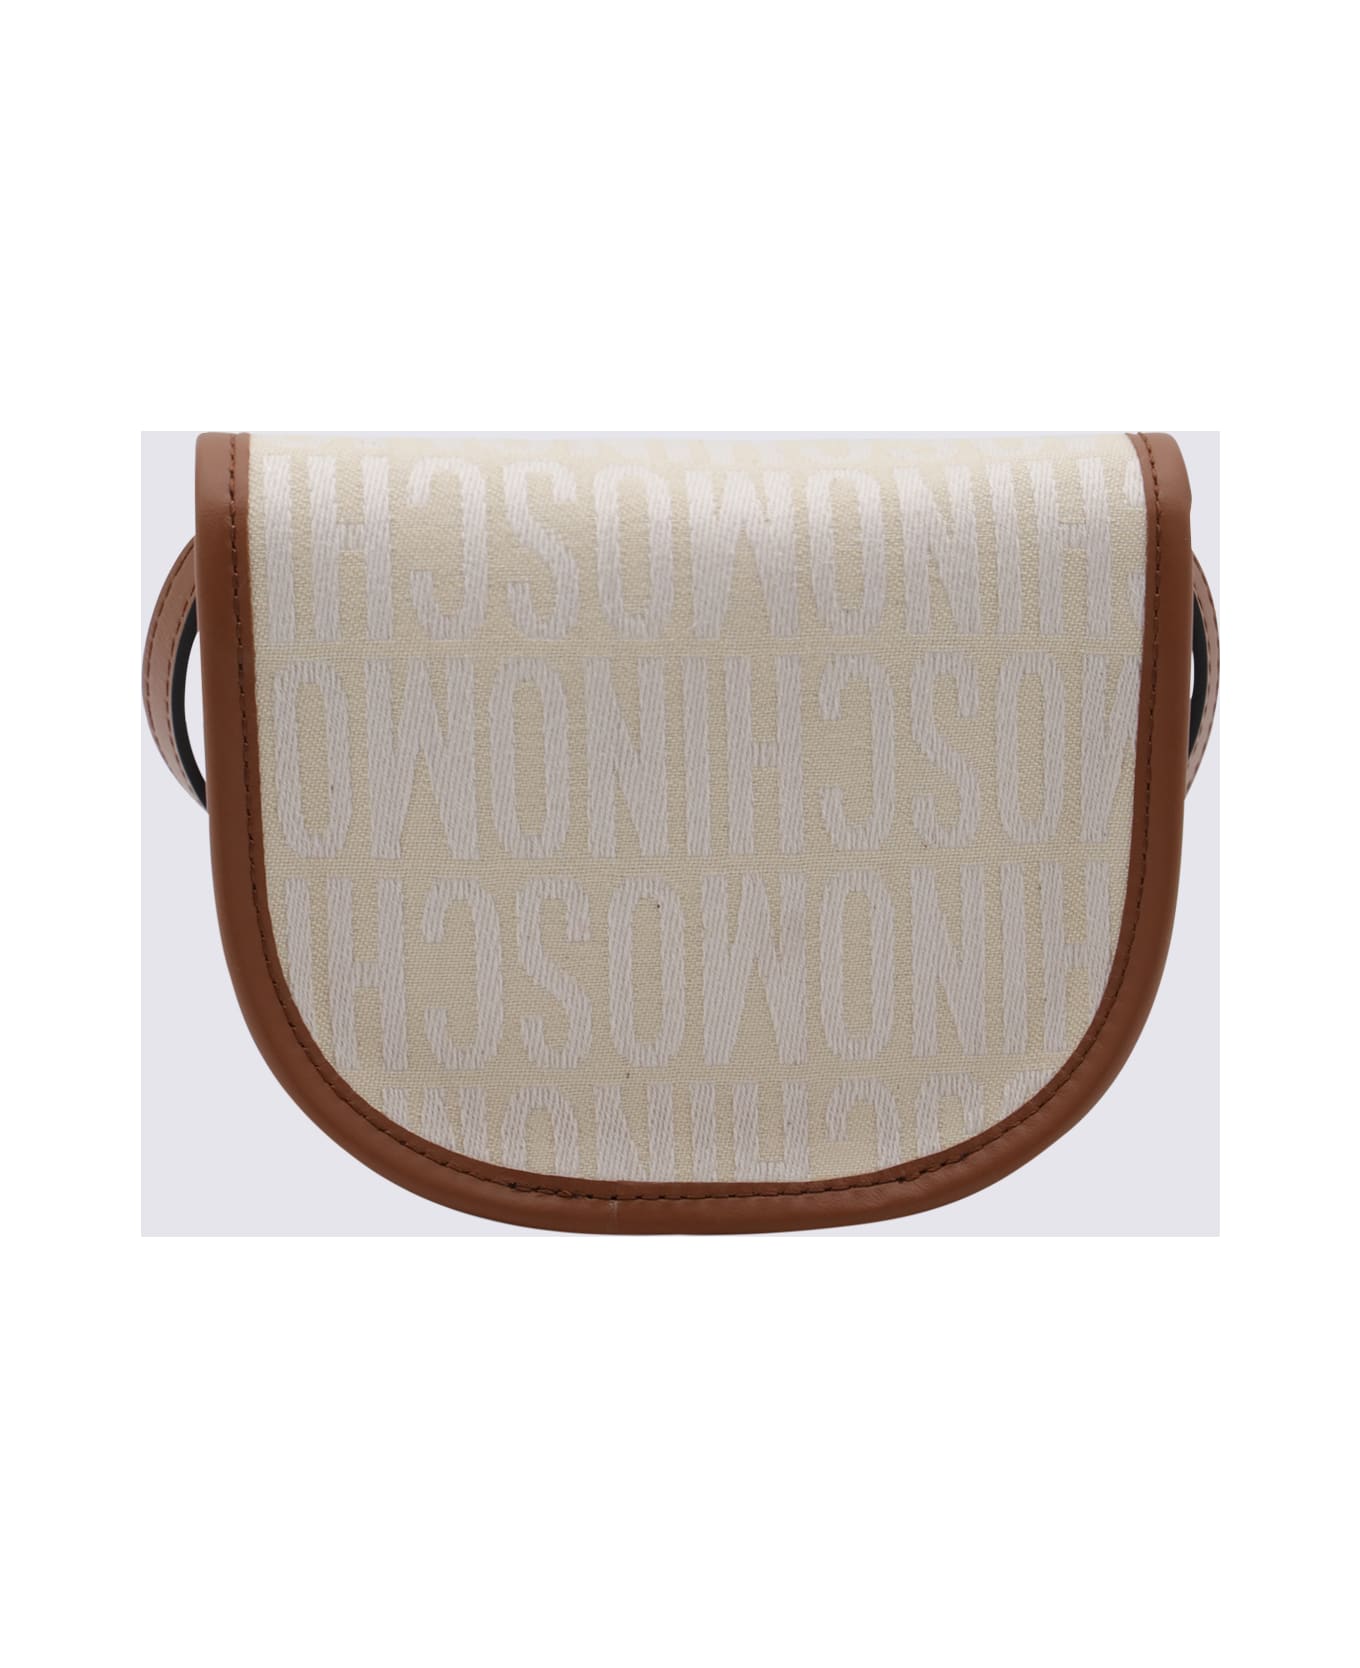 Moschino Ivory Canvas And Leather Allover Crossbody Bag - White トートバッグ